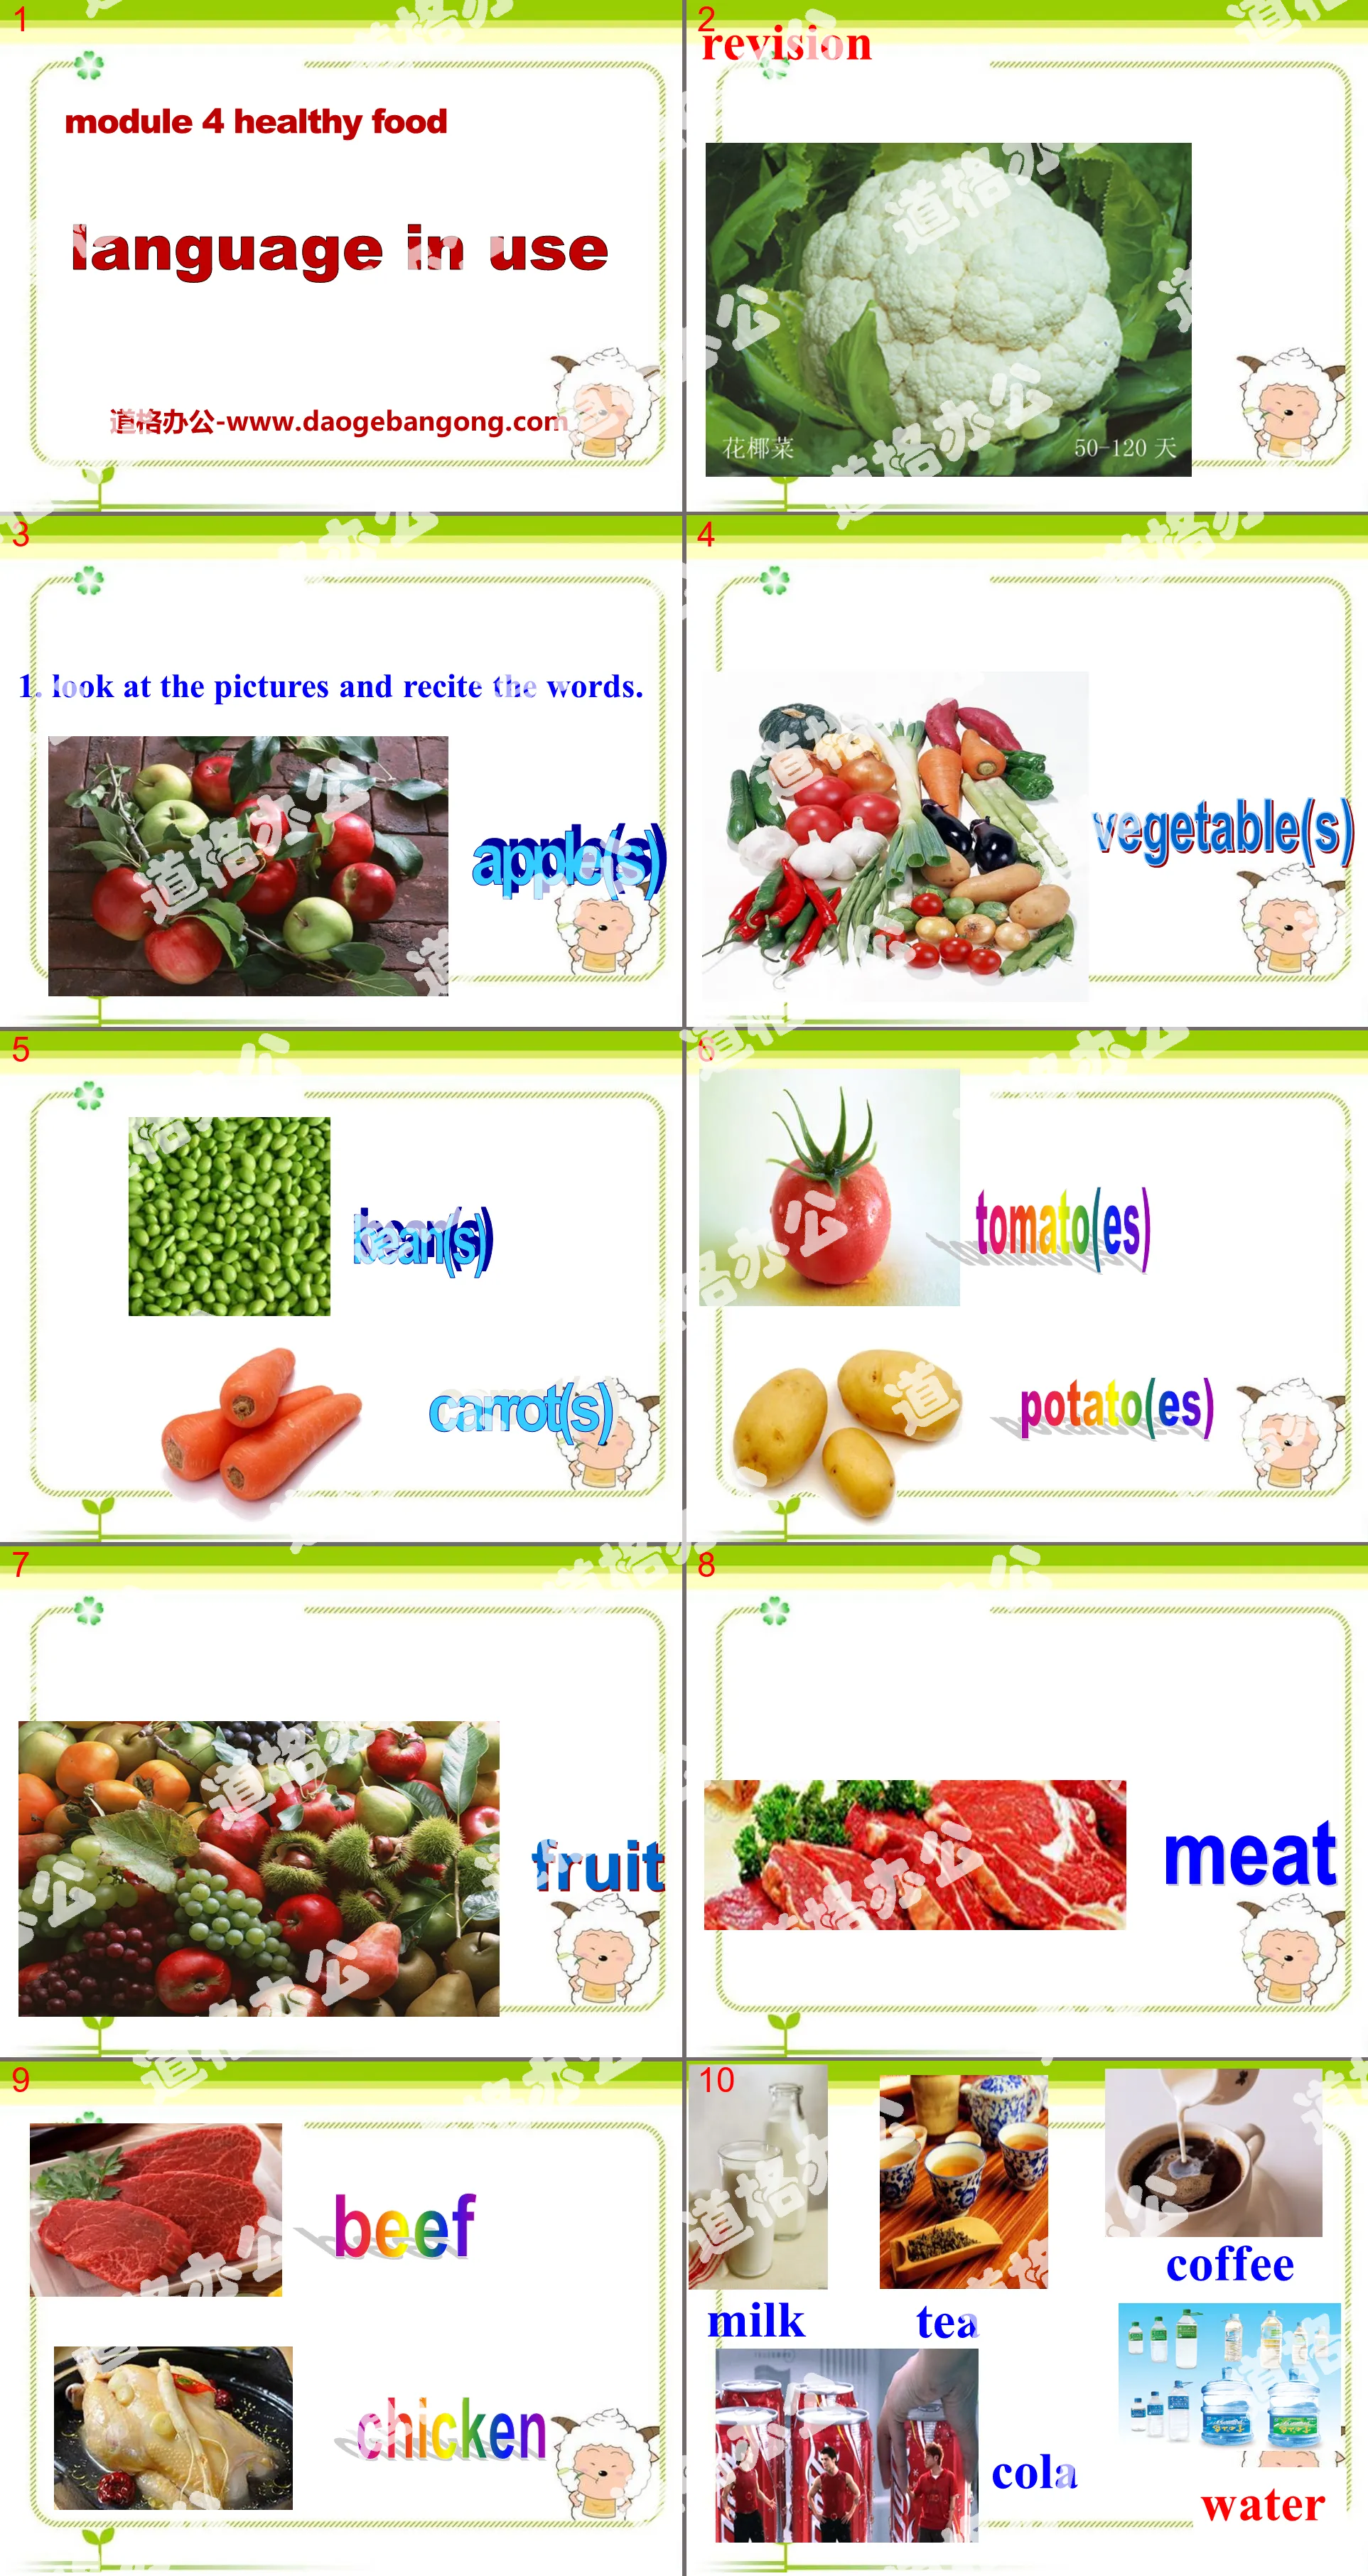 "Language in use" Healthy food PPT courseware 3